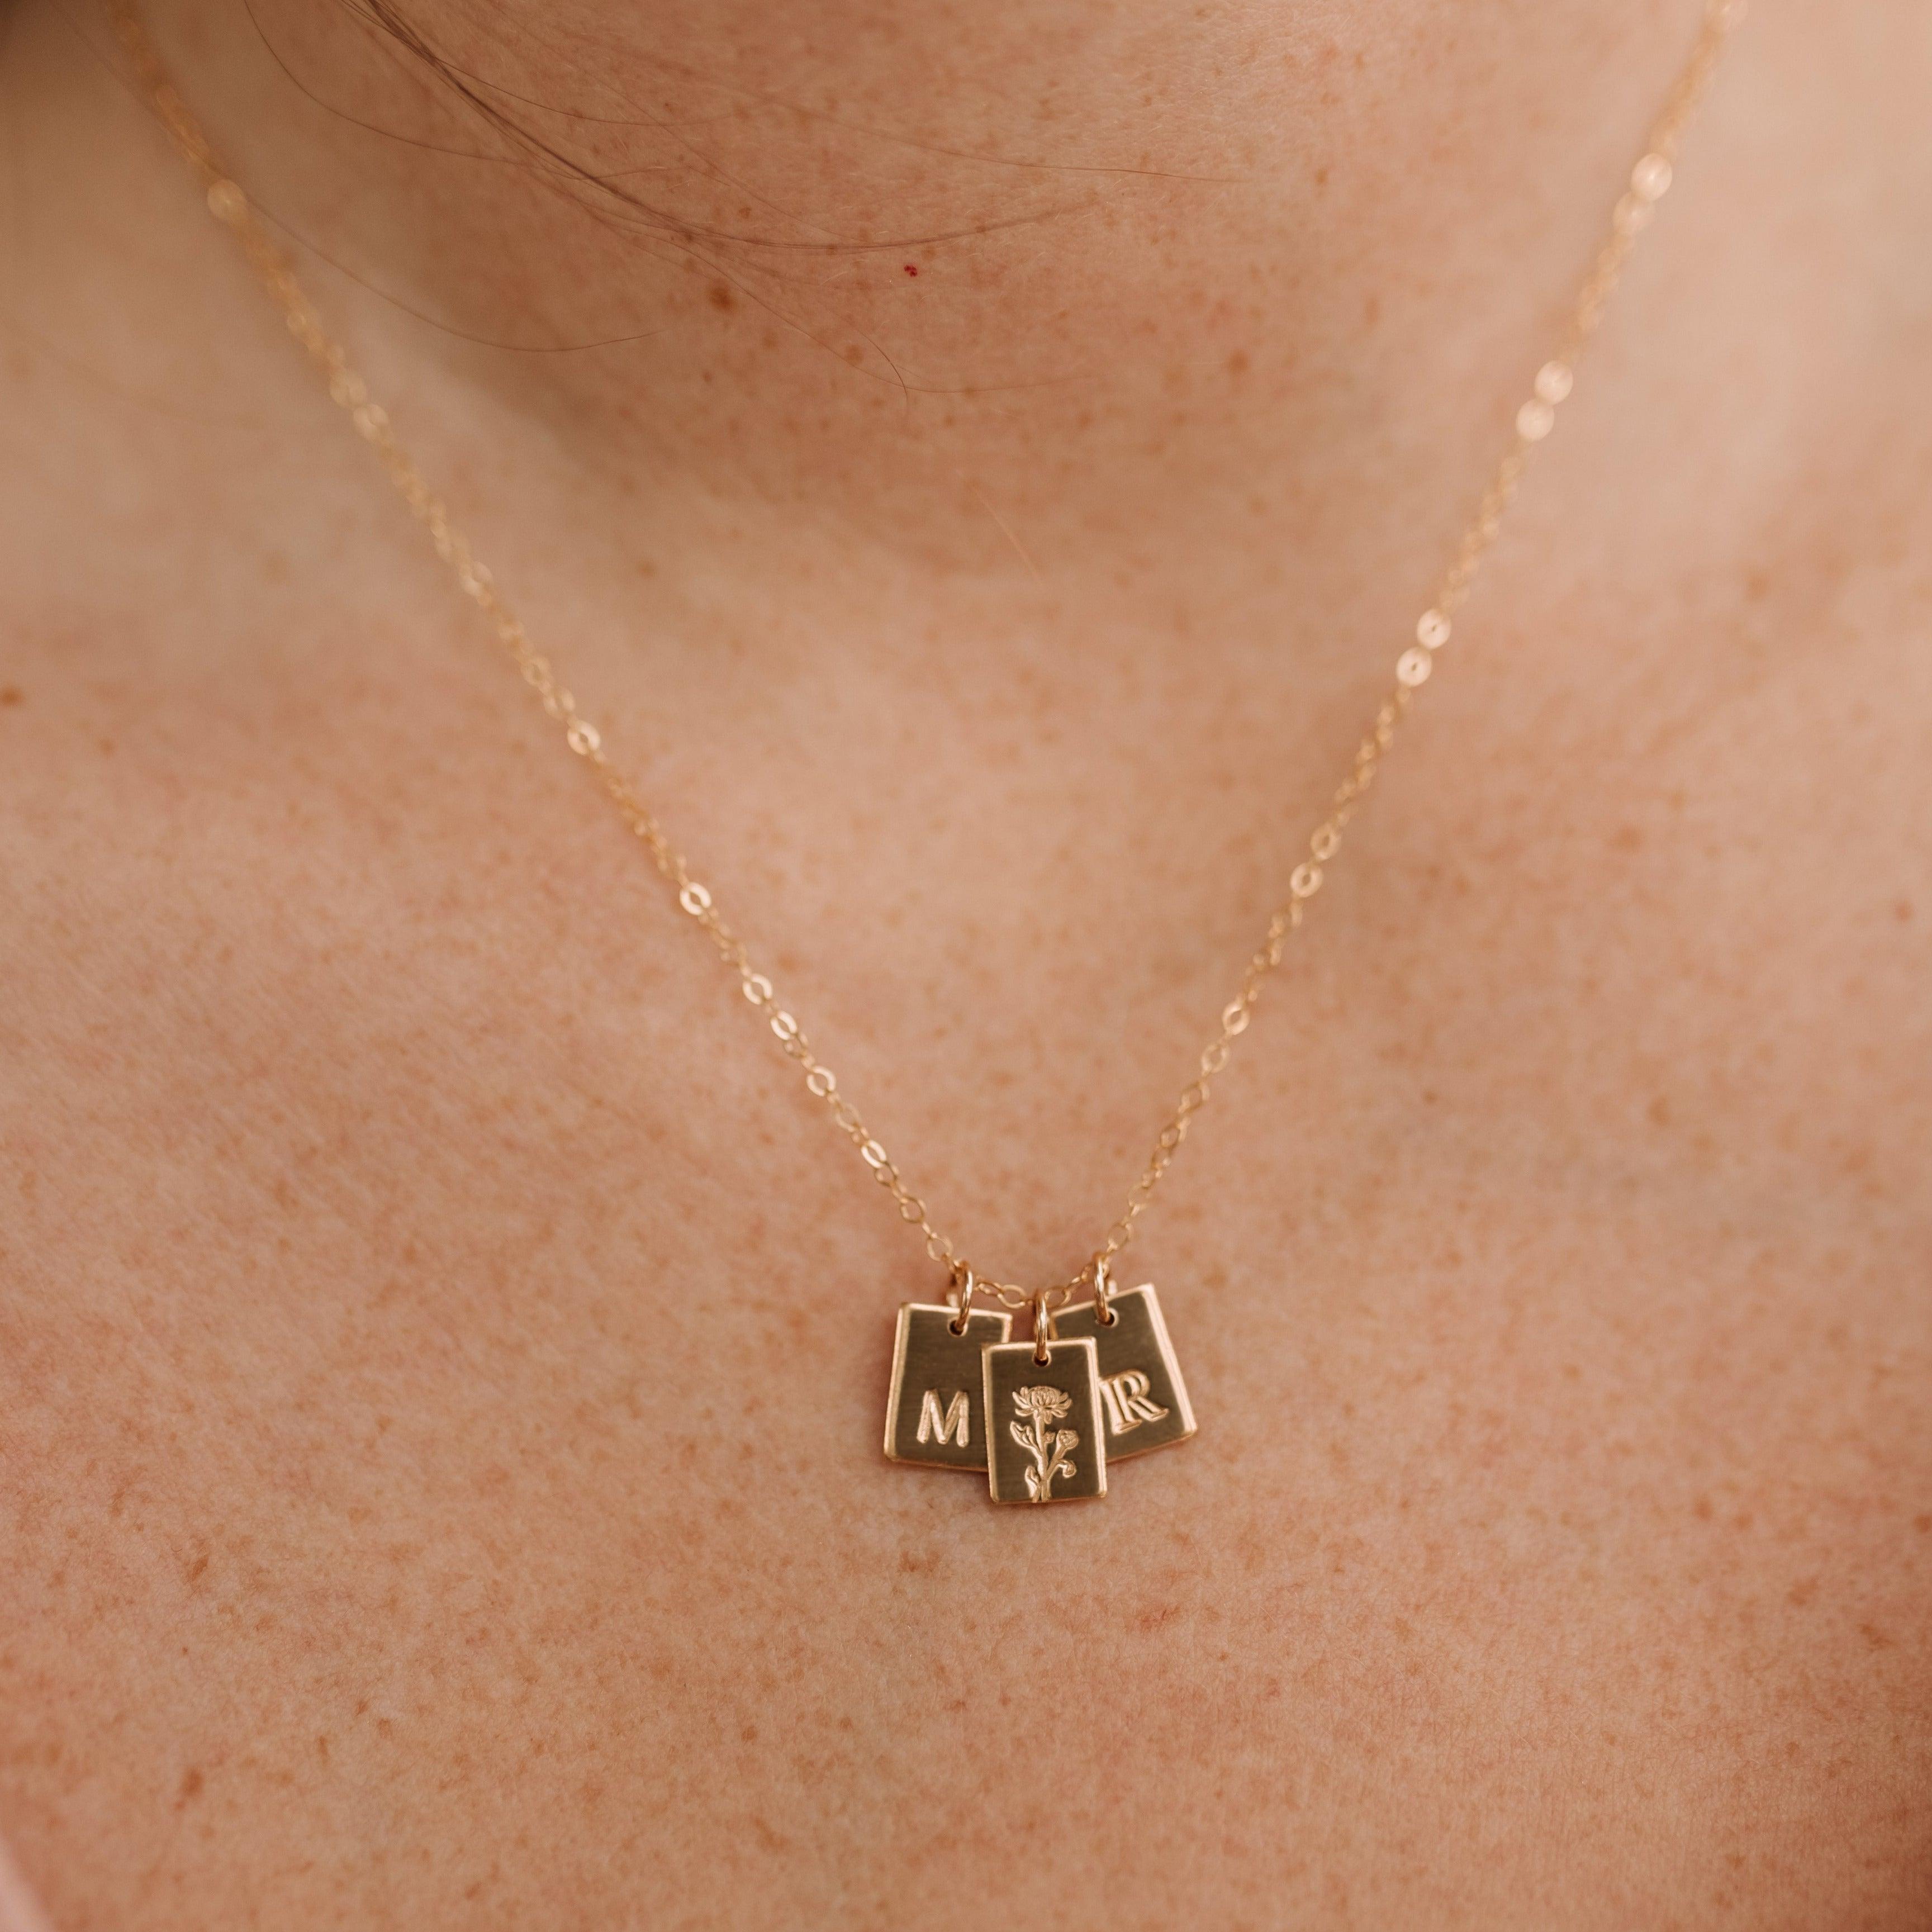 Minnie Tag Necklace - Nolia Jewelry - Meaningful + Sustainably Handcrafted Jewelry